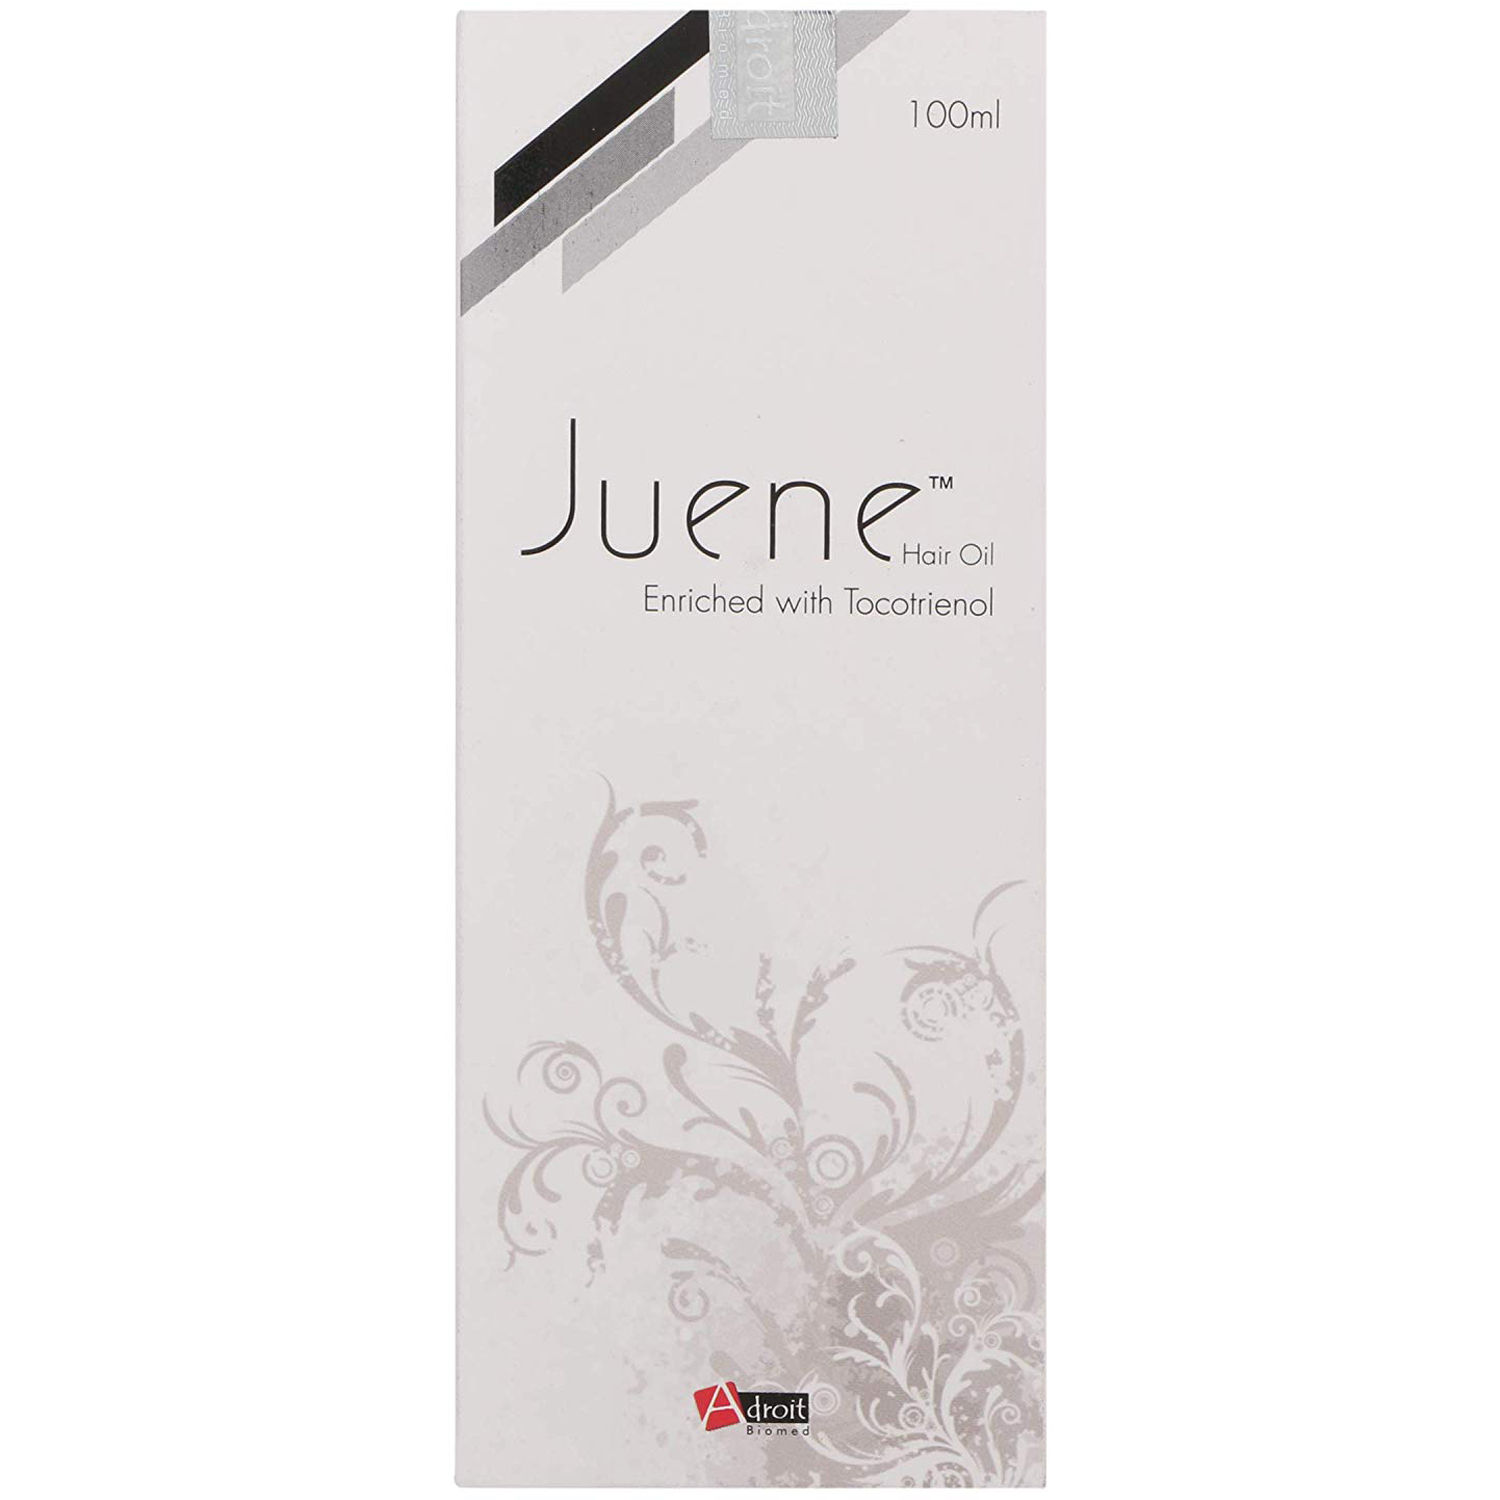 Juene Hair Oil, 100 ml Price, Uses, Side Effects, Composition - Apollo  Pharmacy